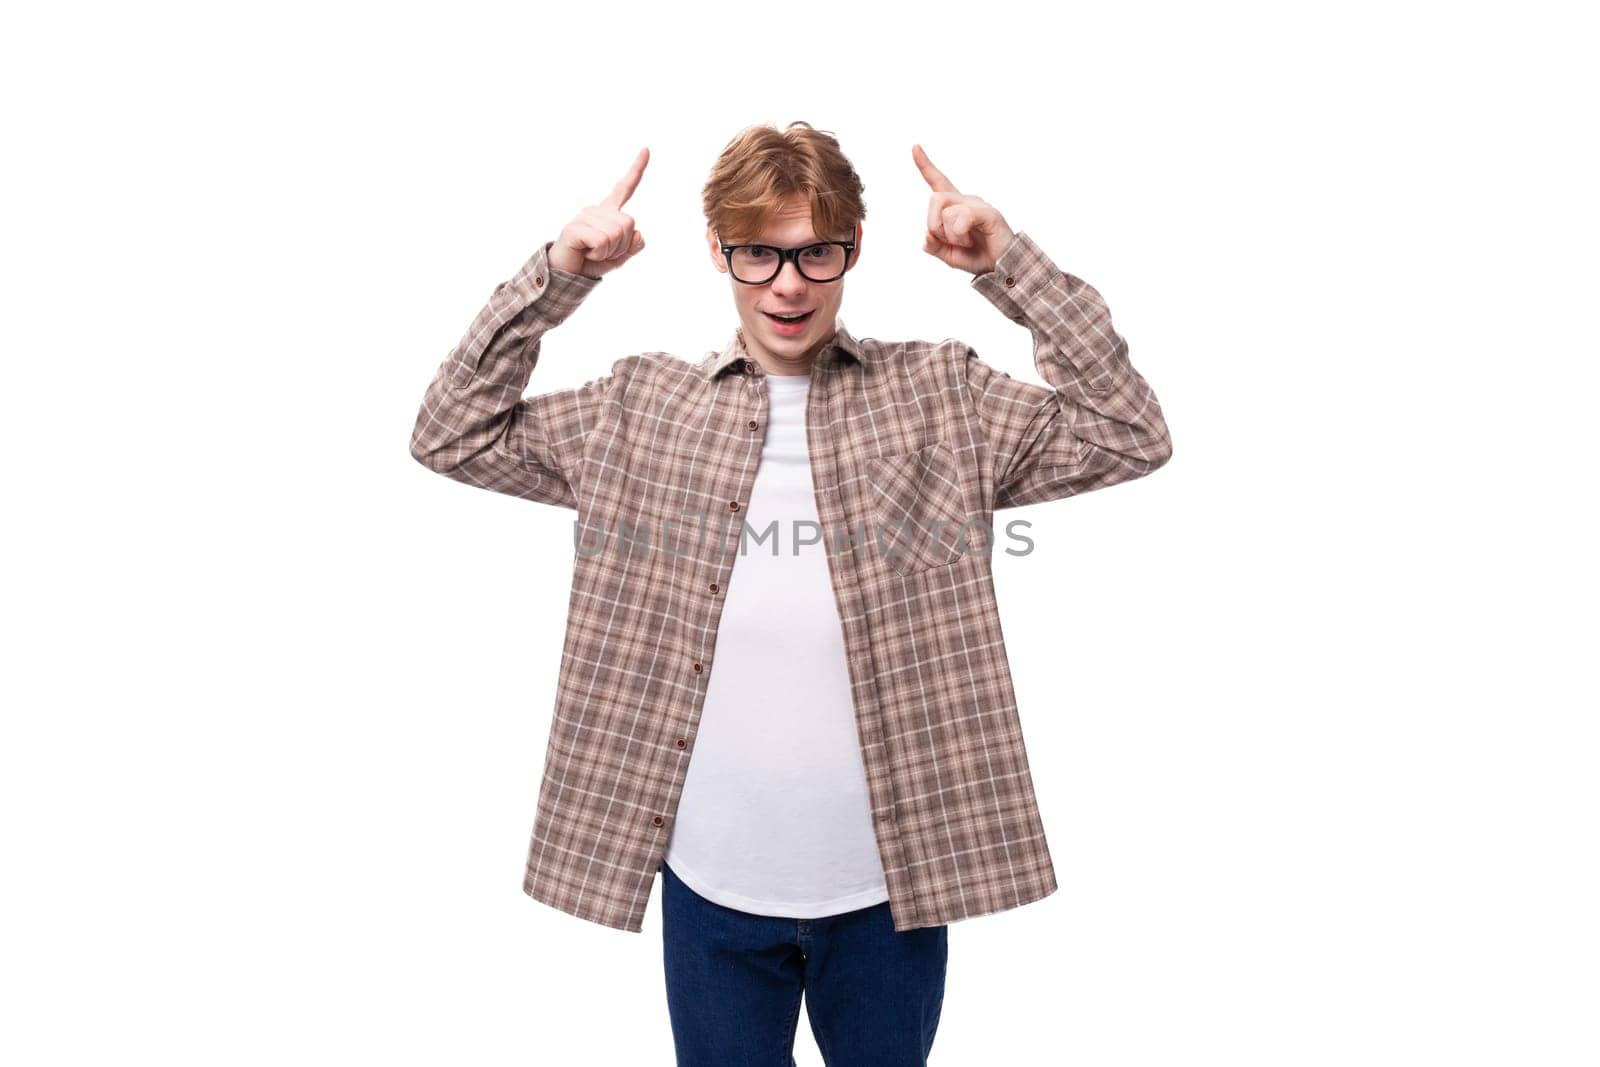 young joyful red-haired guy with glasses in a plaid shirt on a white background.